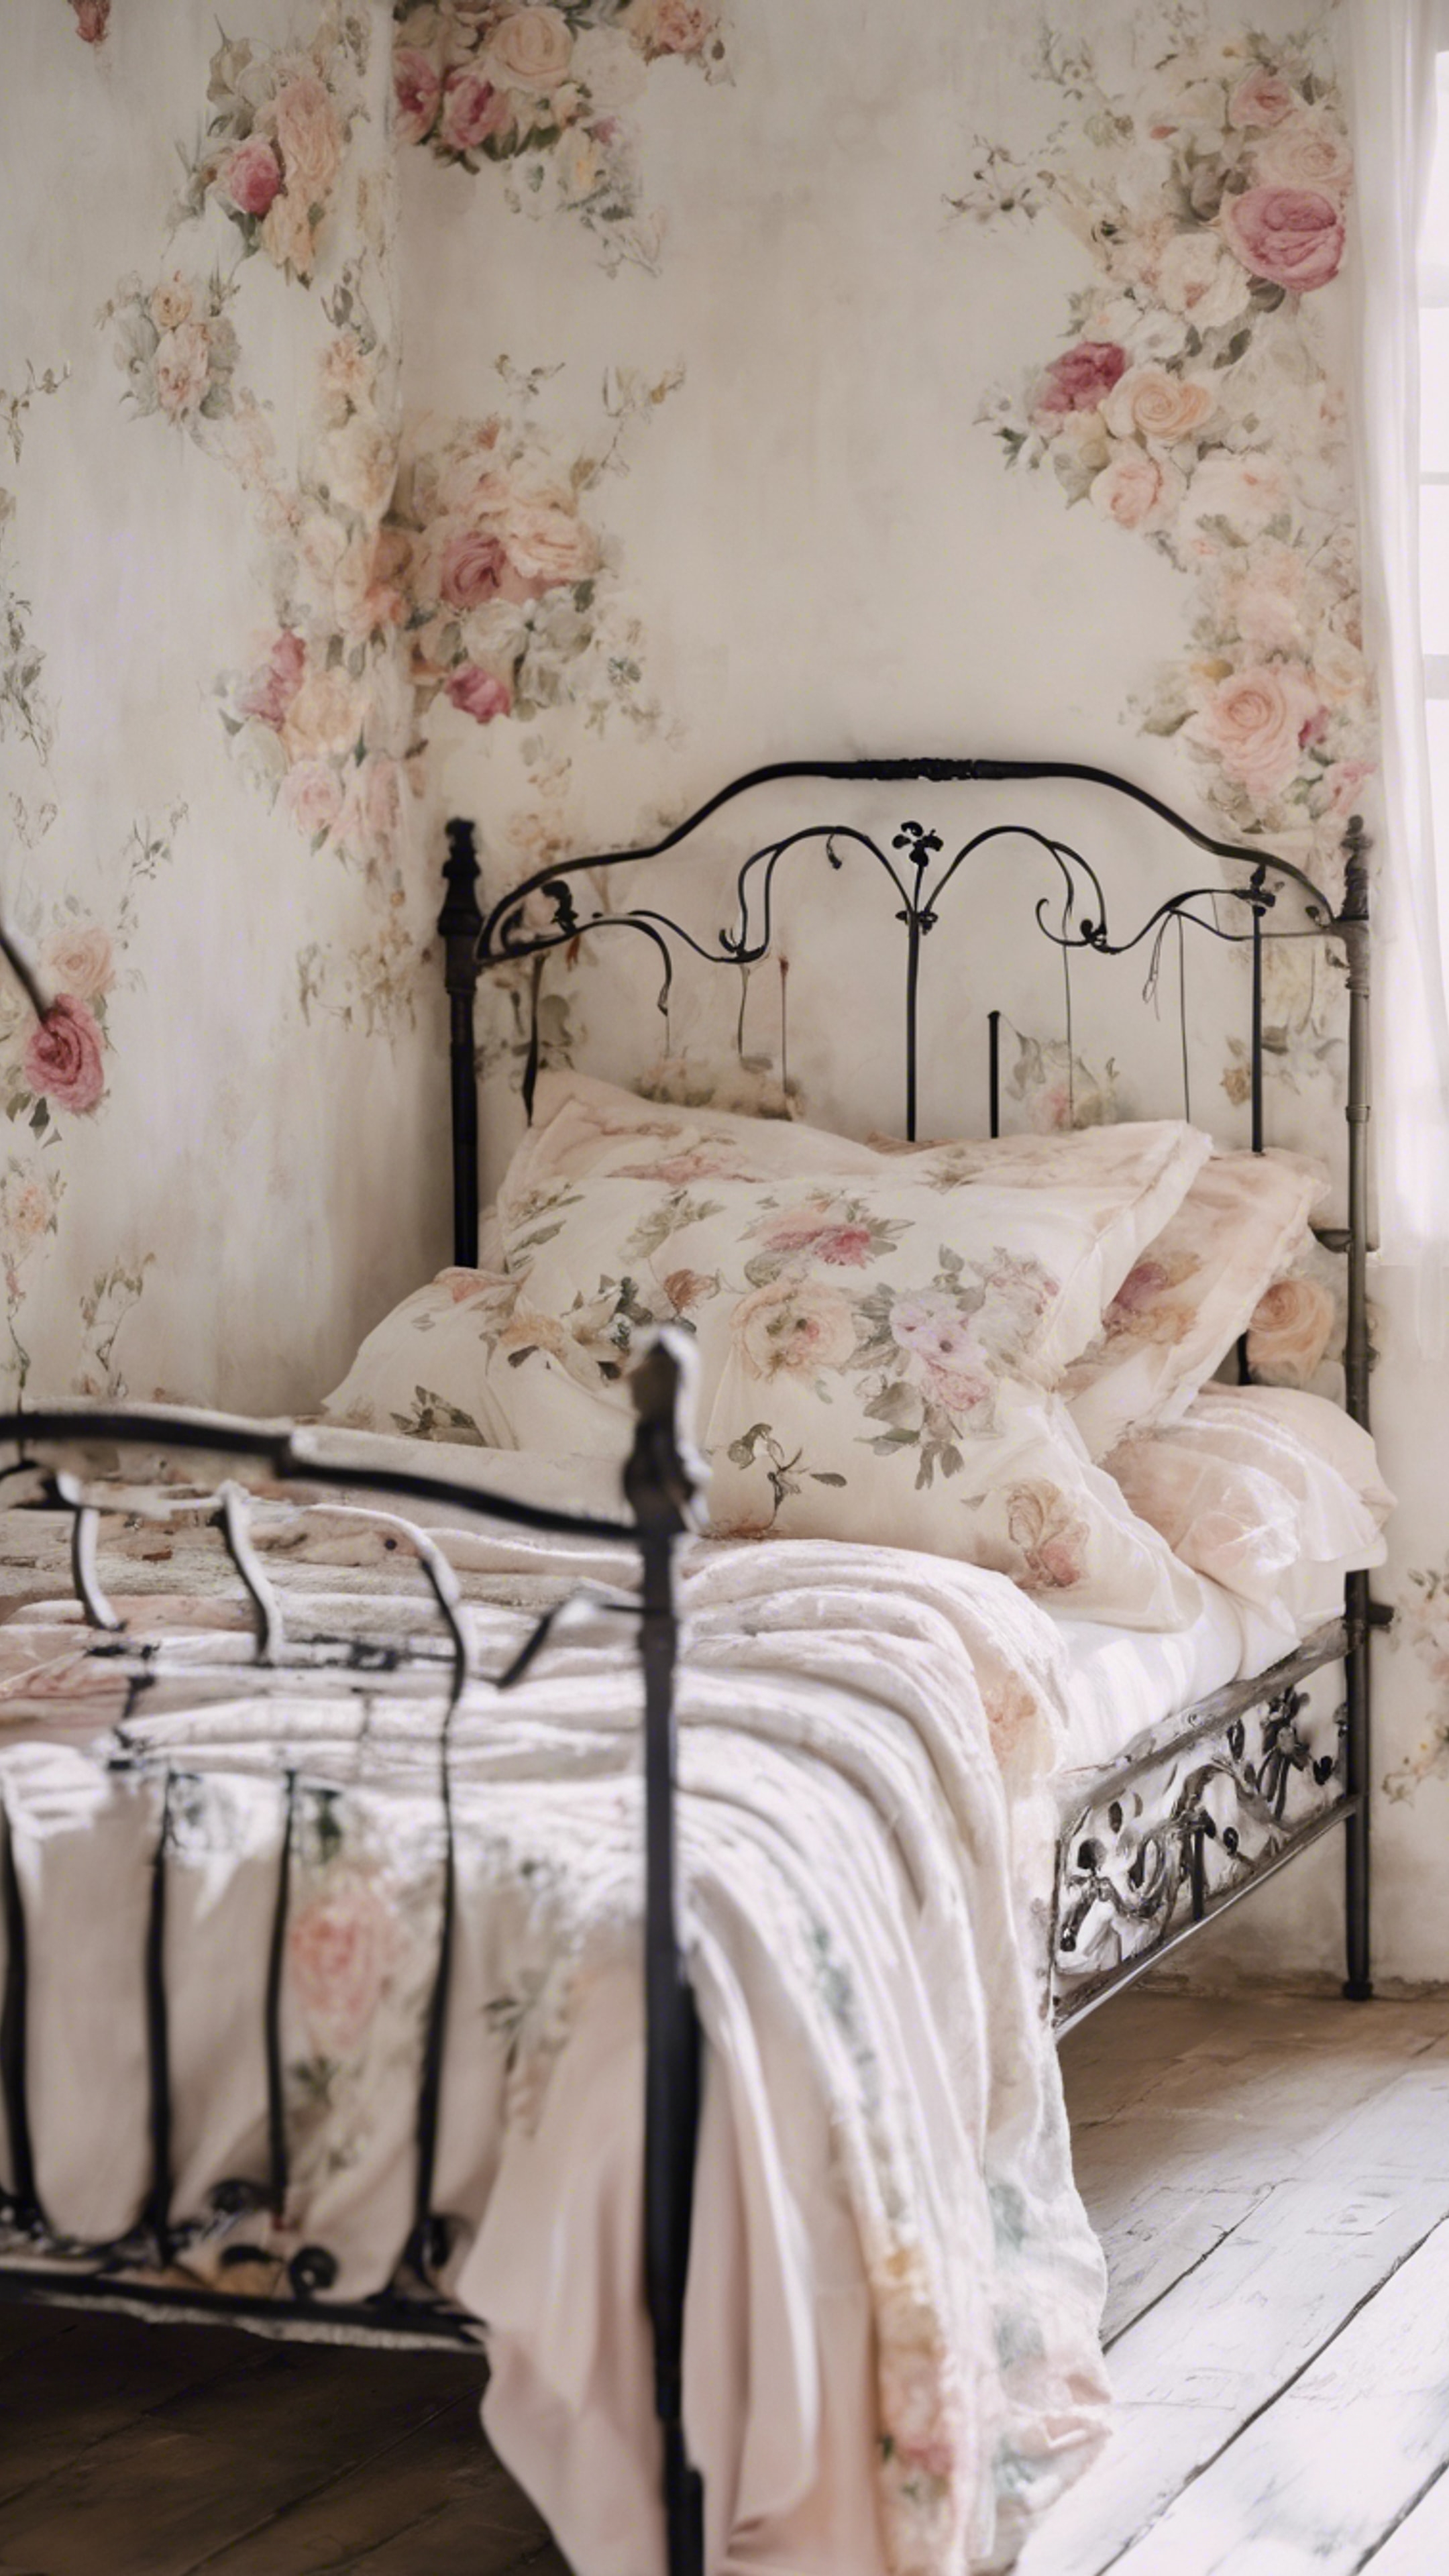 A French country bedroom featuring a wrought-iron bed and pastel floral patterns against whitewashed walls. Tapeet[80b94b8799dc4ca6abc7]